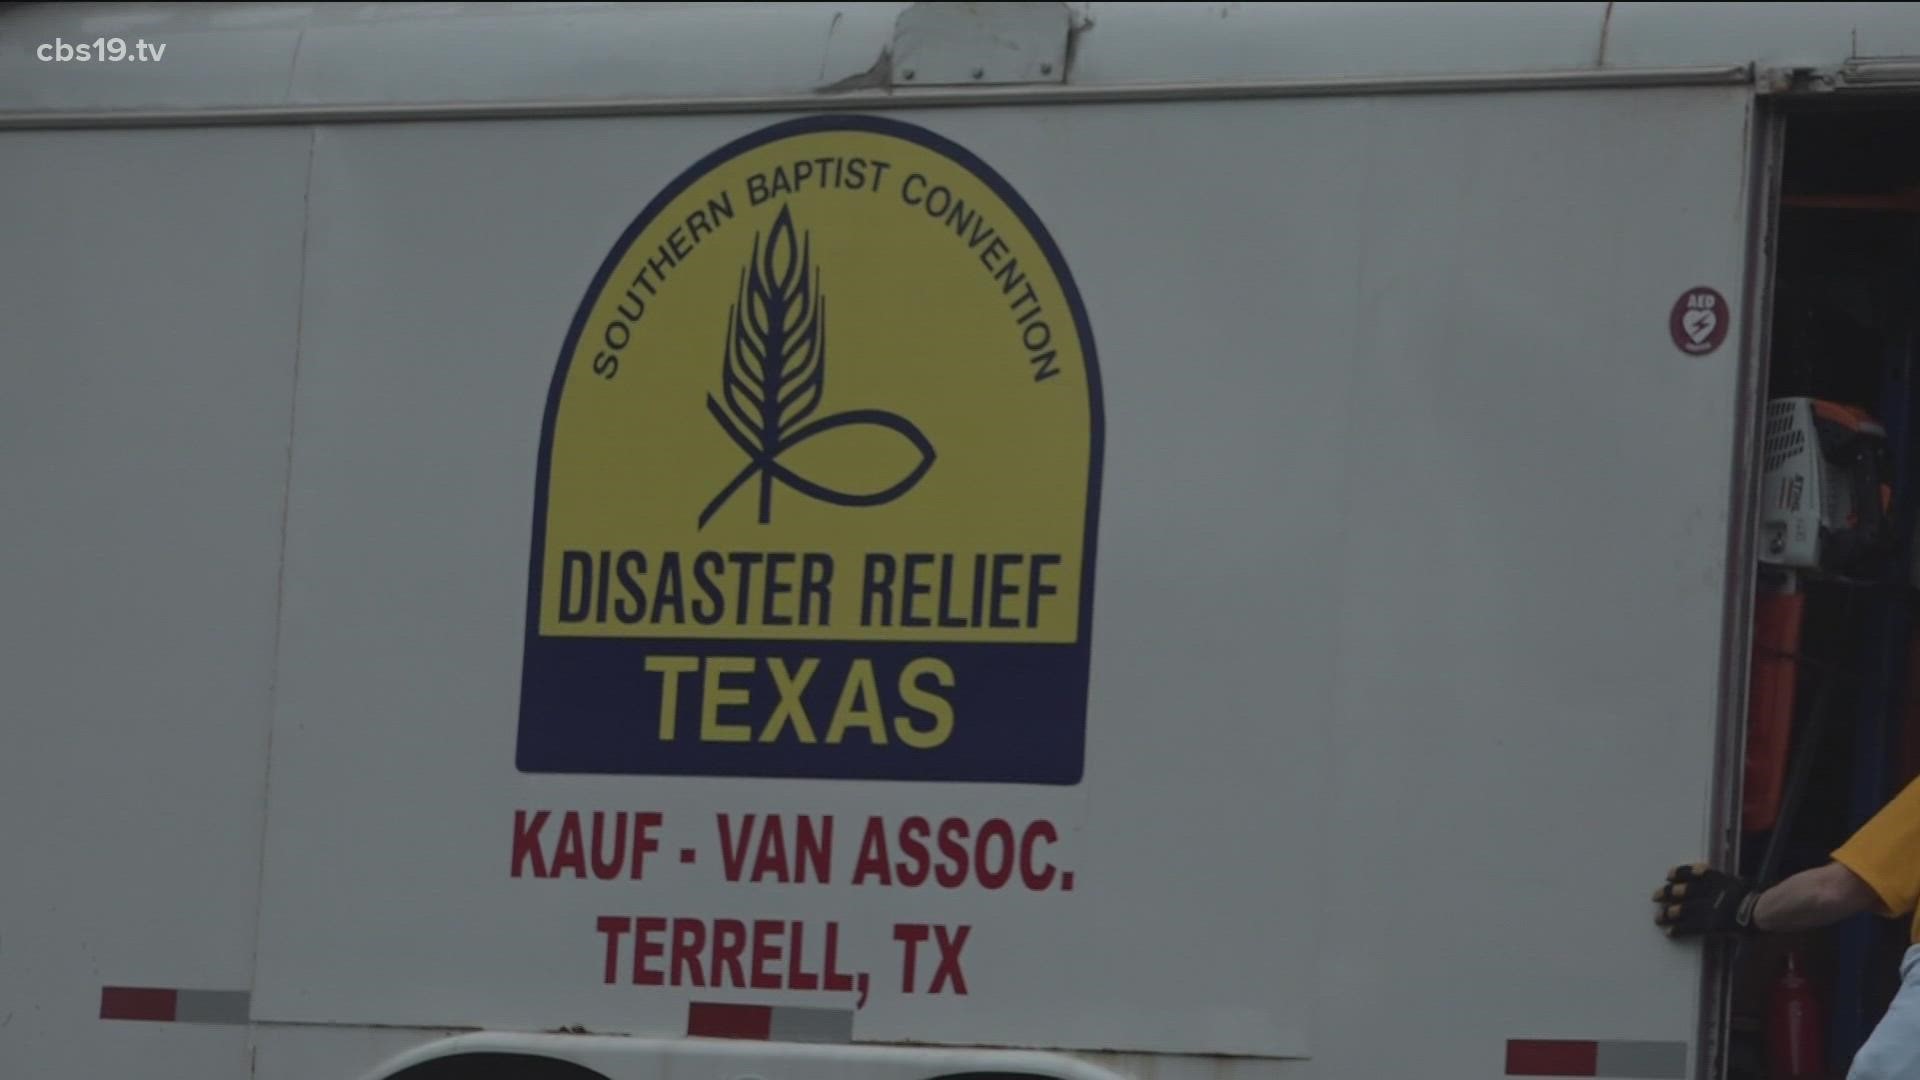 The Texas Baptist Men came to Tyler to provide extra assistance to those in need.